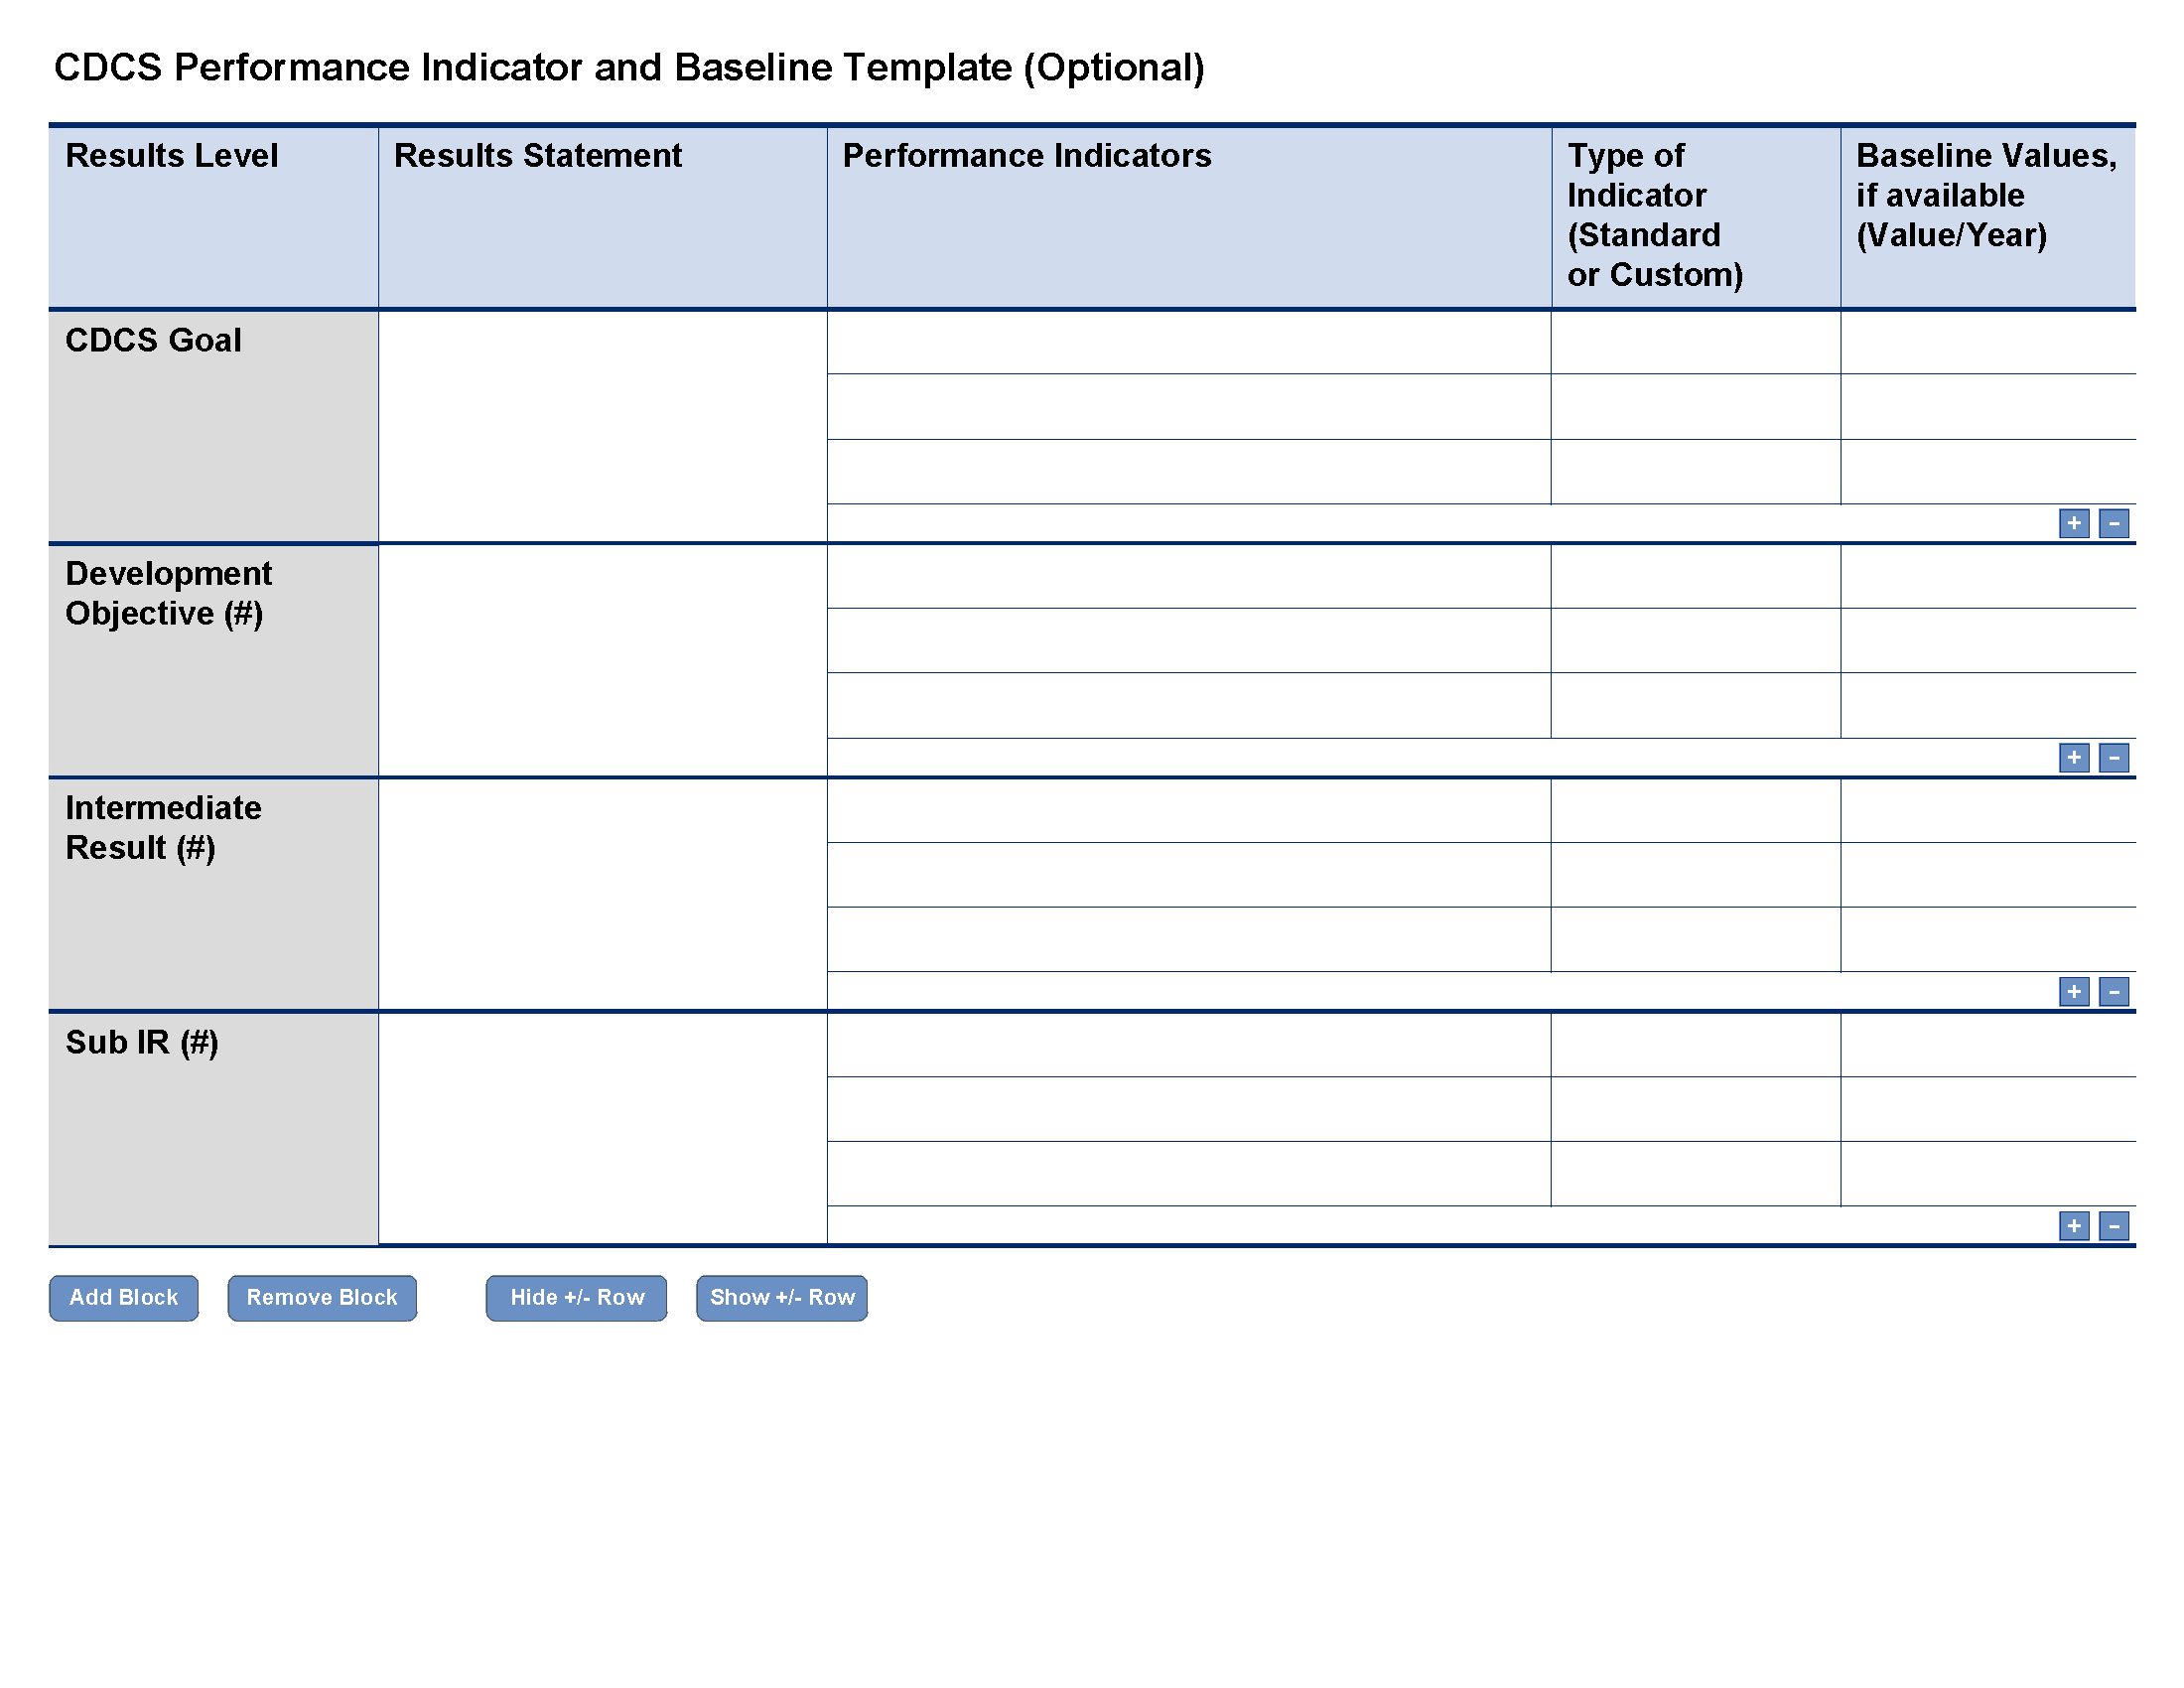 CDCS Performance Indicator and Baseline Template (Optional) graphic